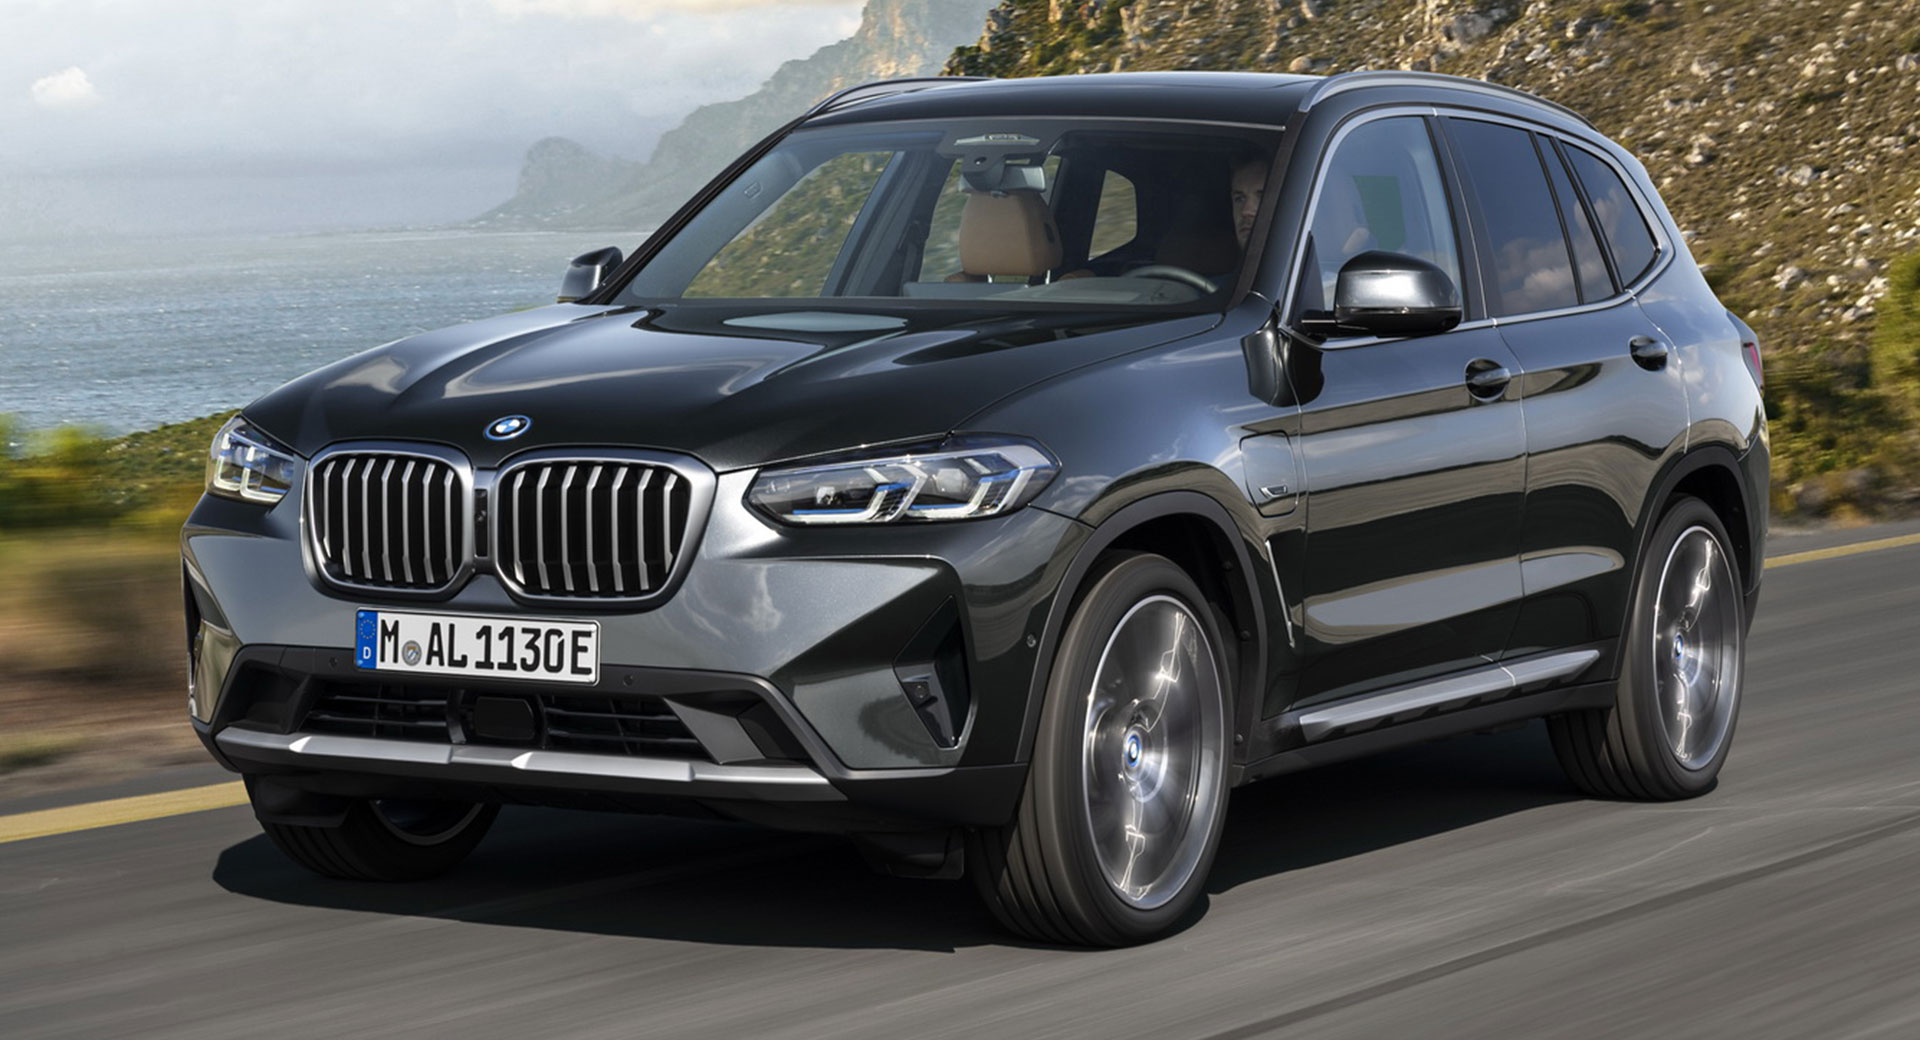 Two BMW X3 xDrive30i SUVs Could Leak Fuel And Catch Fire Auto Recent